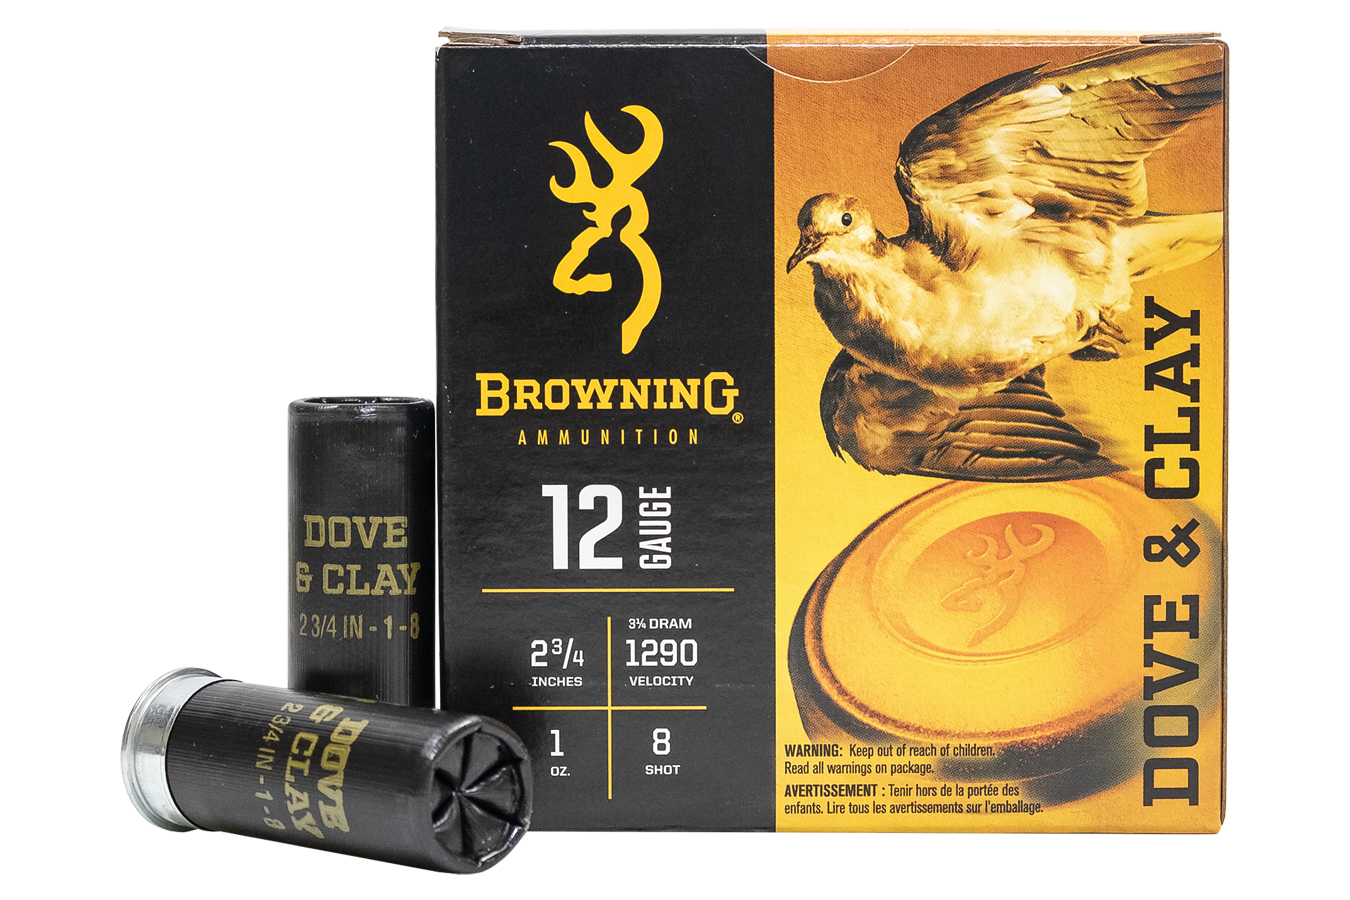 BROWNING AMMUNITION 12 GA 2-3/4 IN 1 OZ 8 DOVE AND CLAY